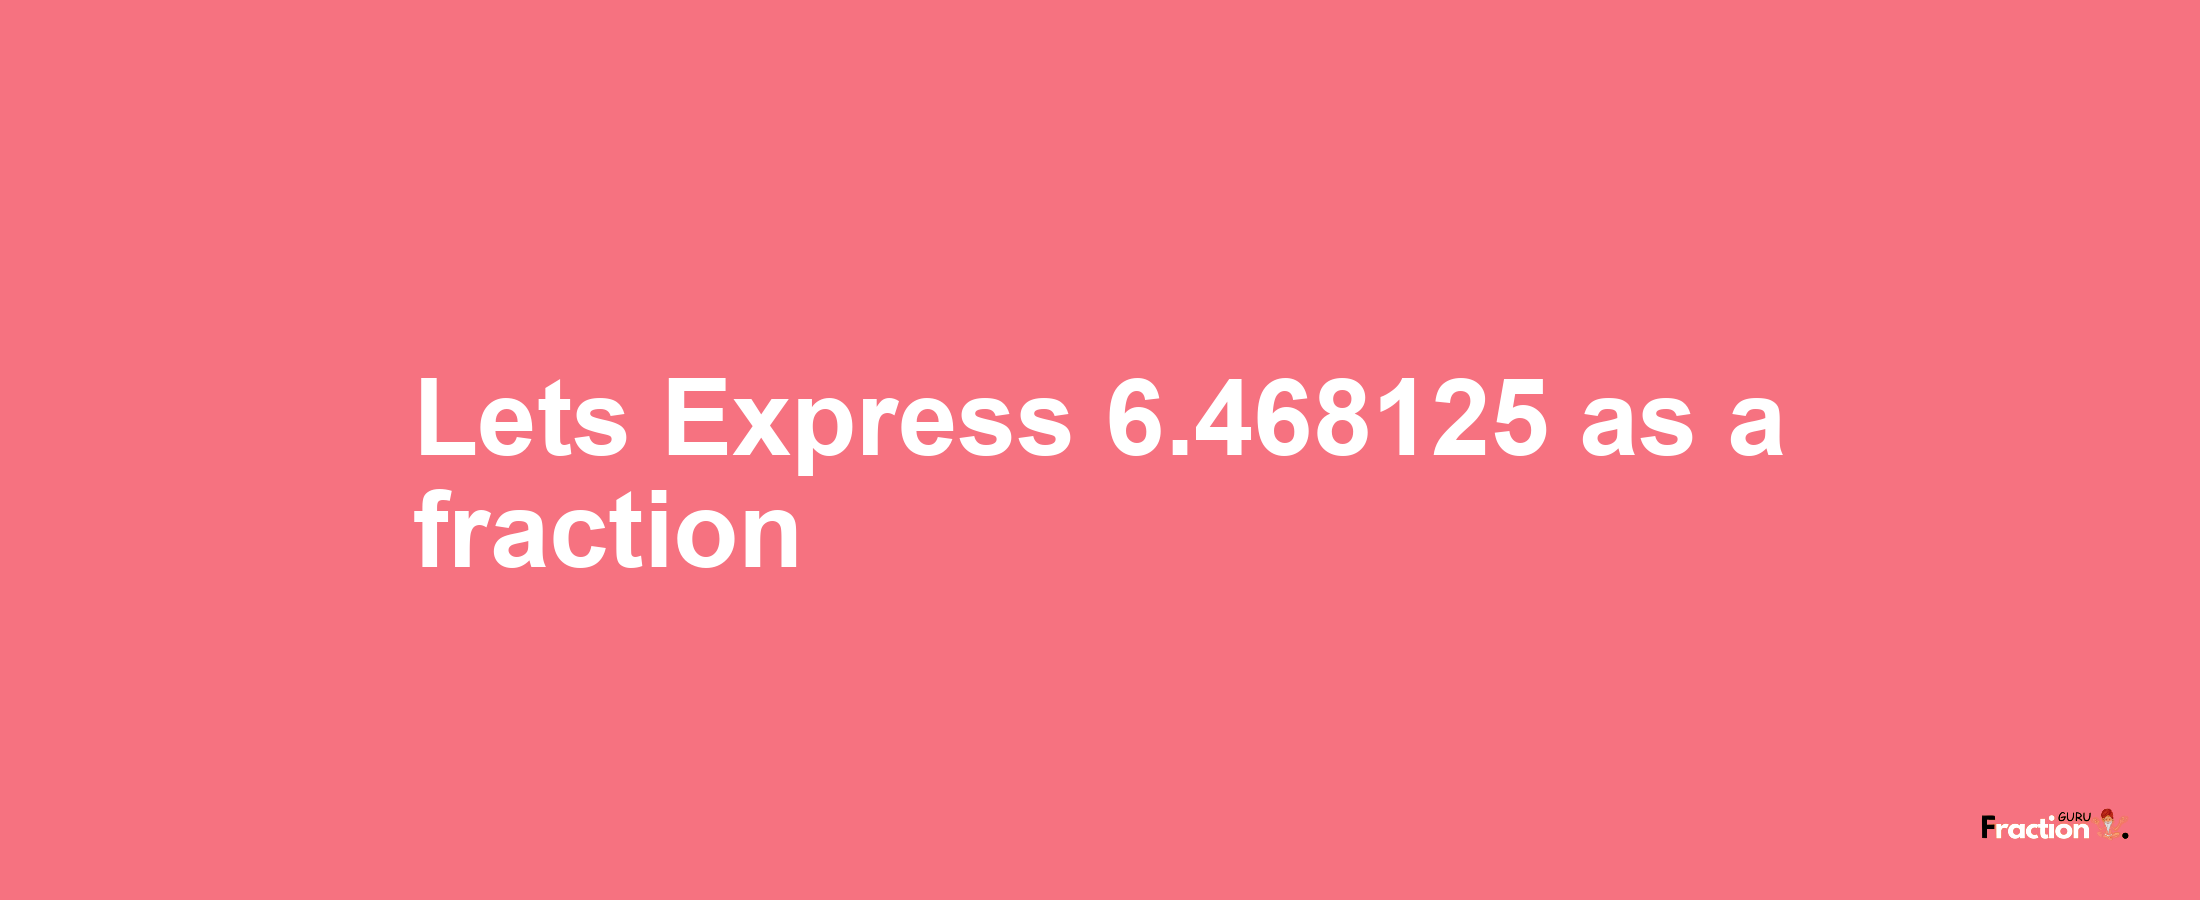 Lets Express 6.468125 as afraction